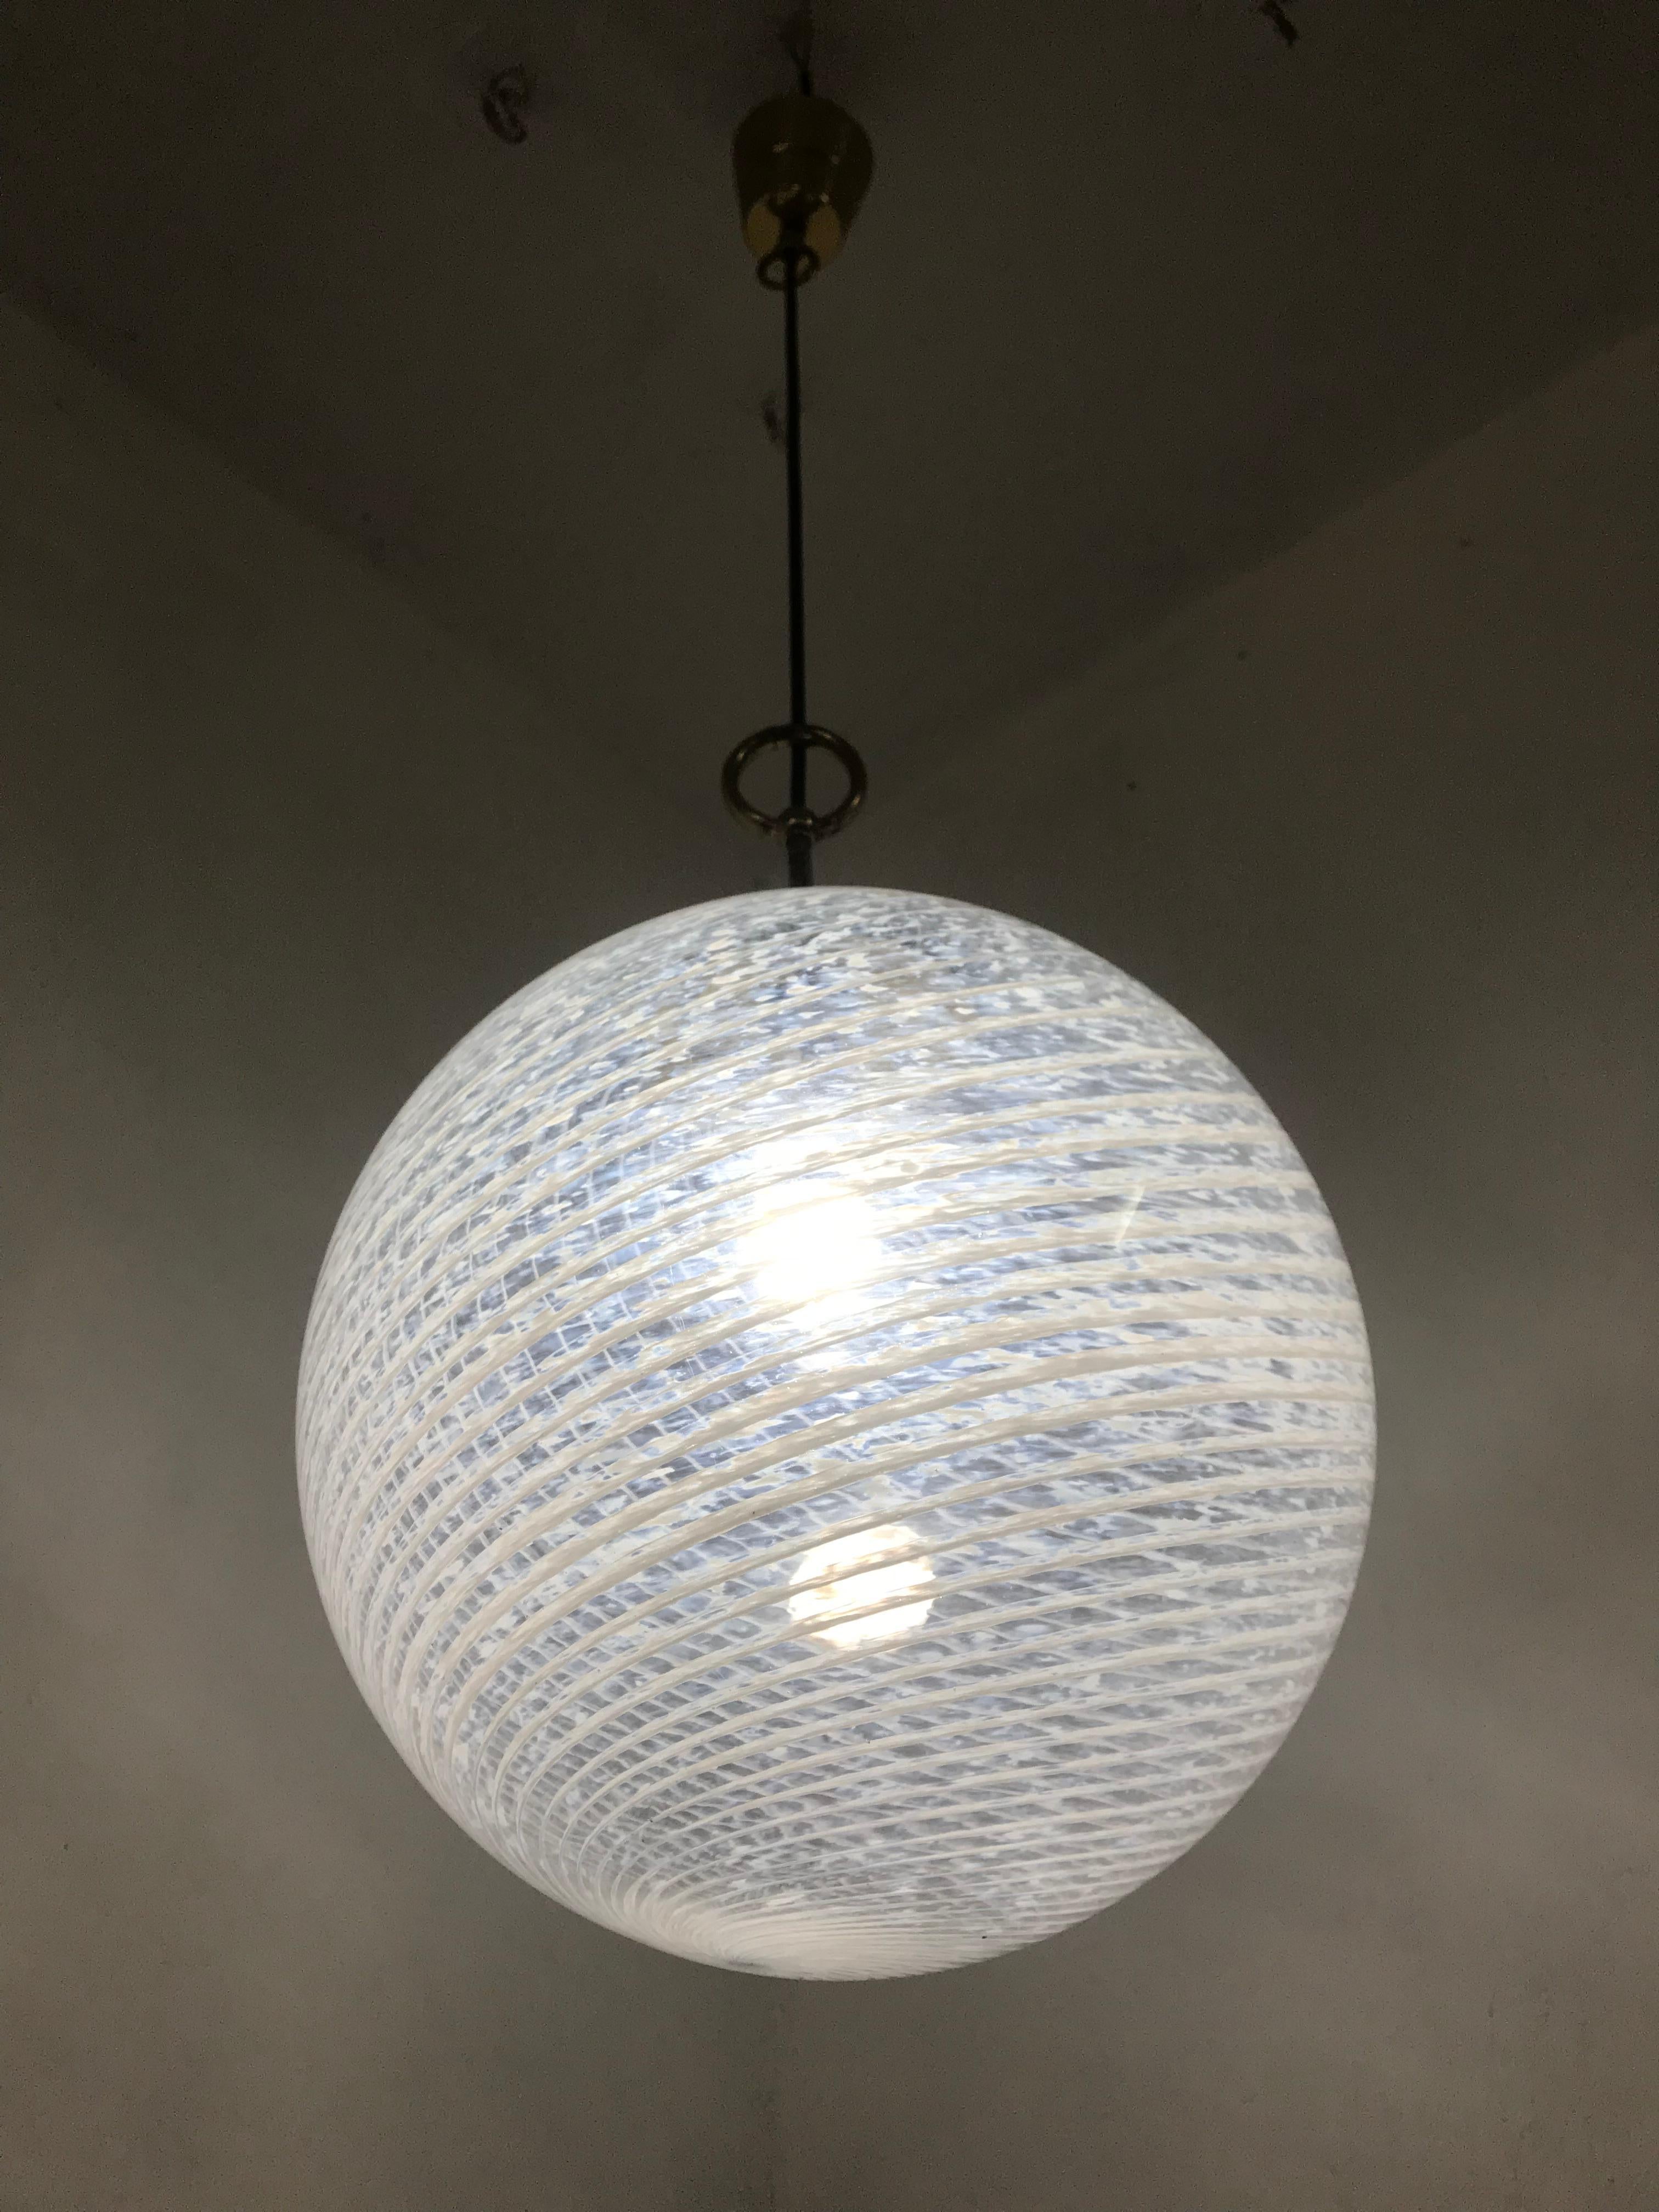 20th Century Mid-Century Modern Light by Venini in striped and marbled Murano Glass, 1970s